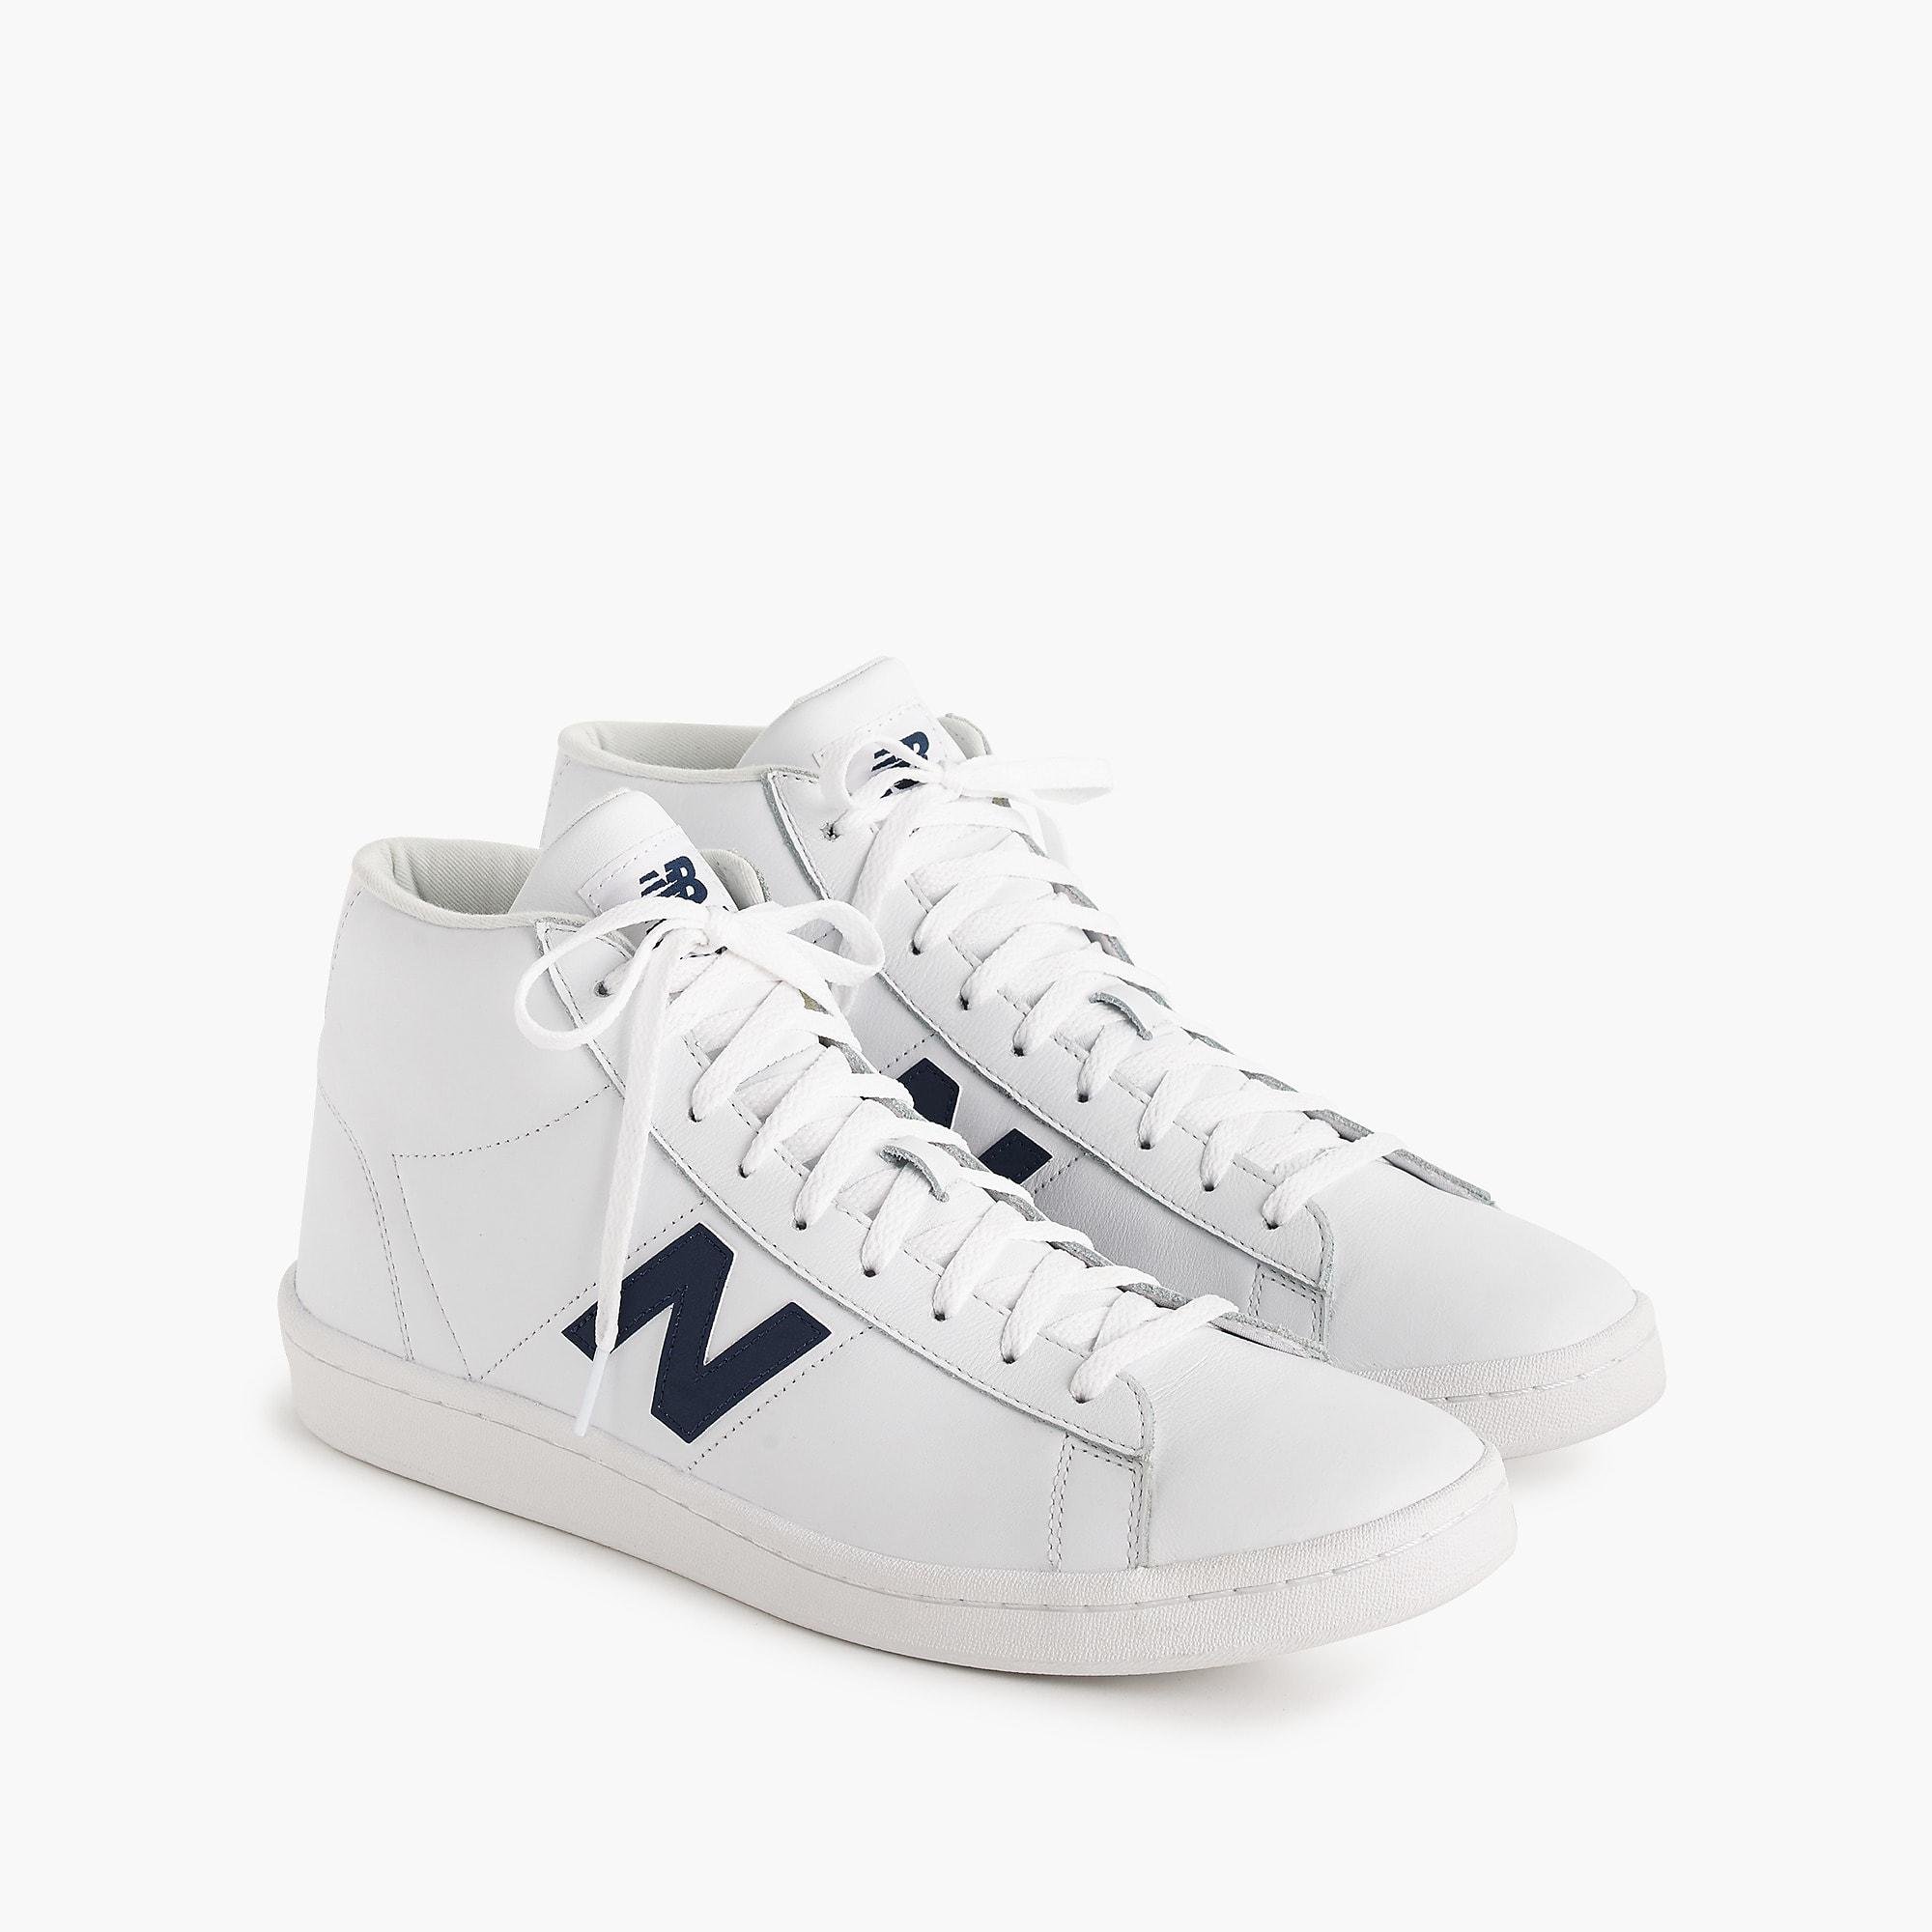 New Balance 891 Leather High-top Sneakers in White for Men - Lyst